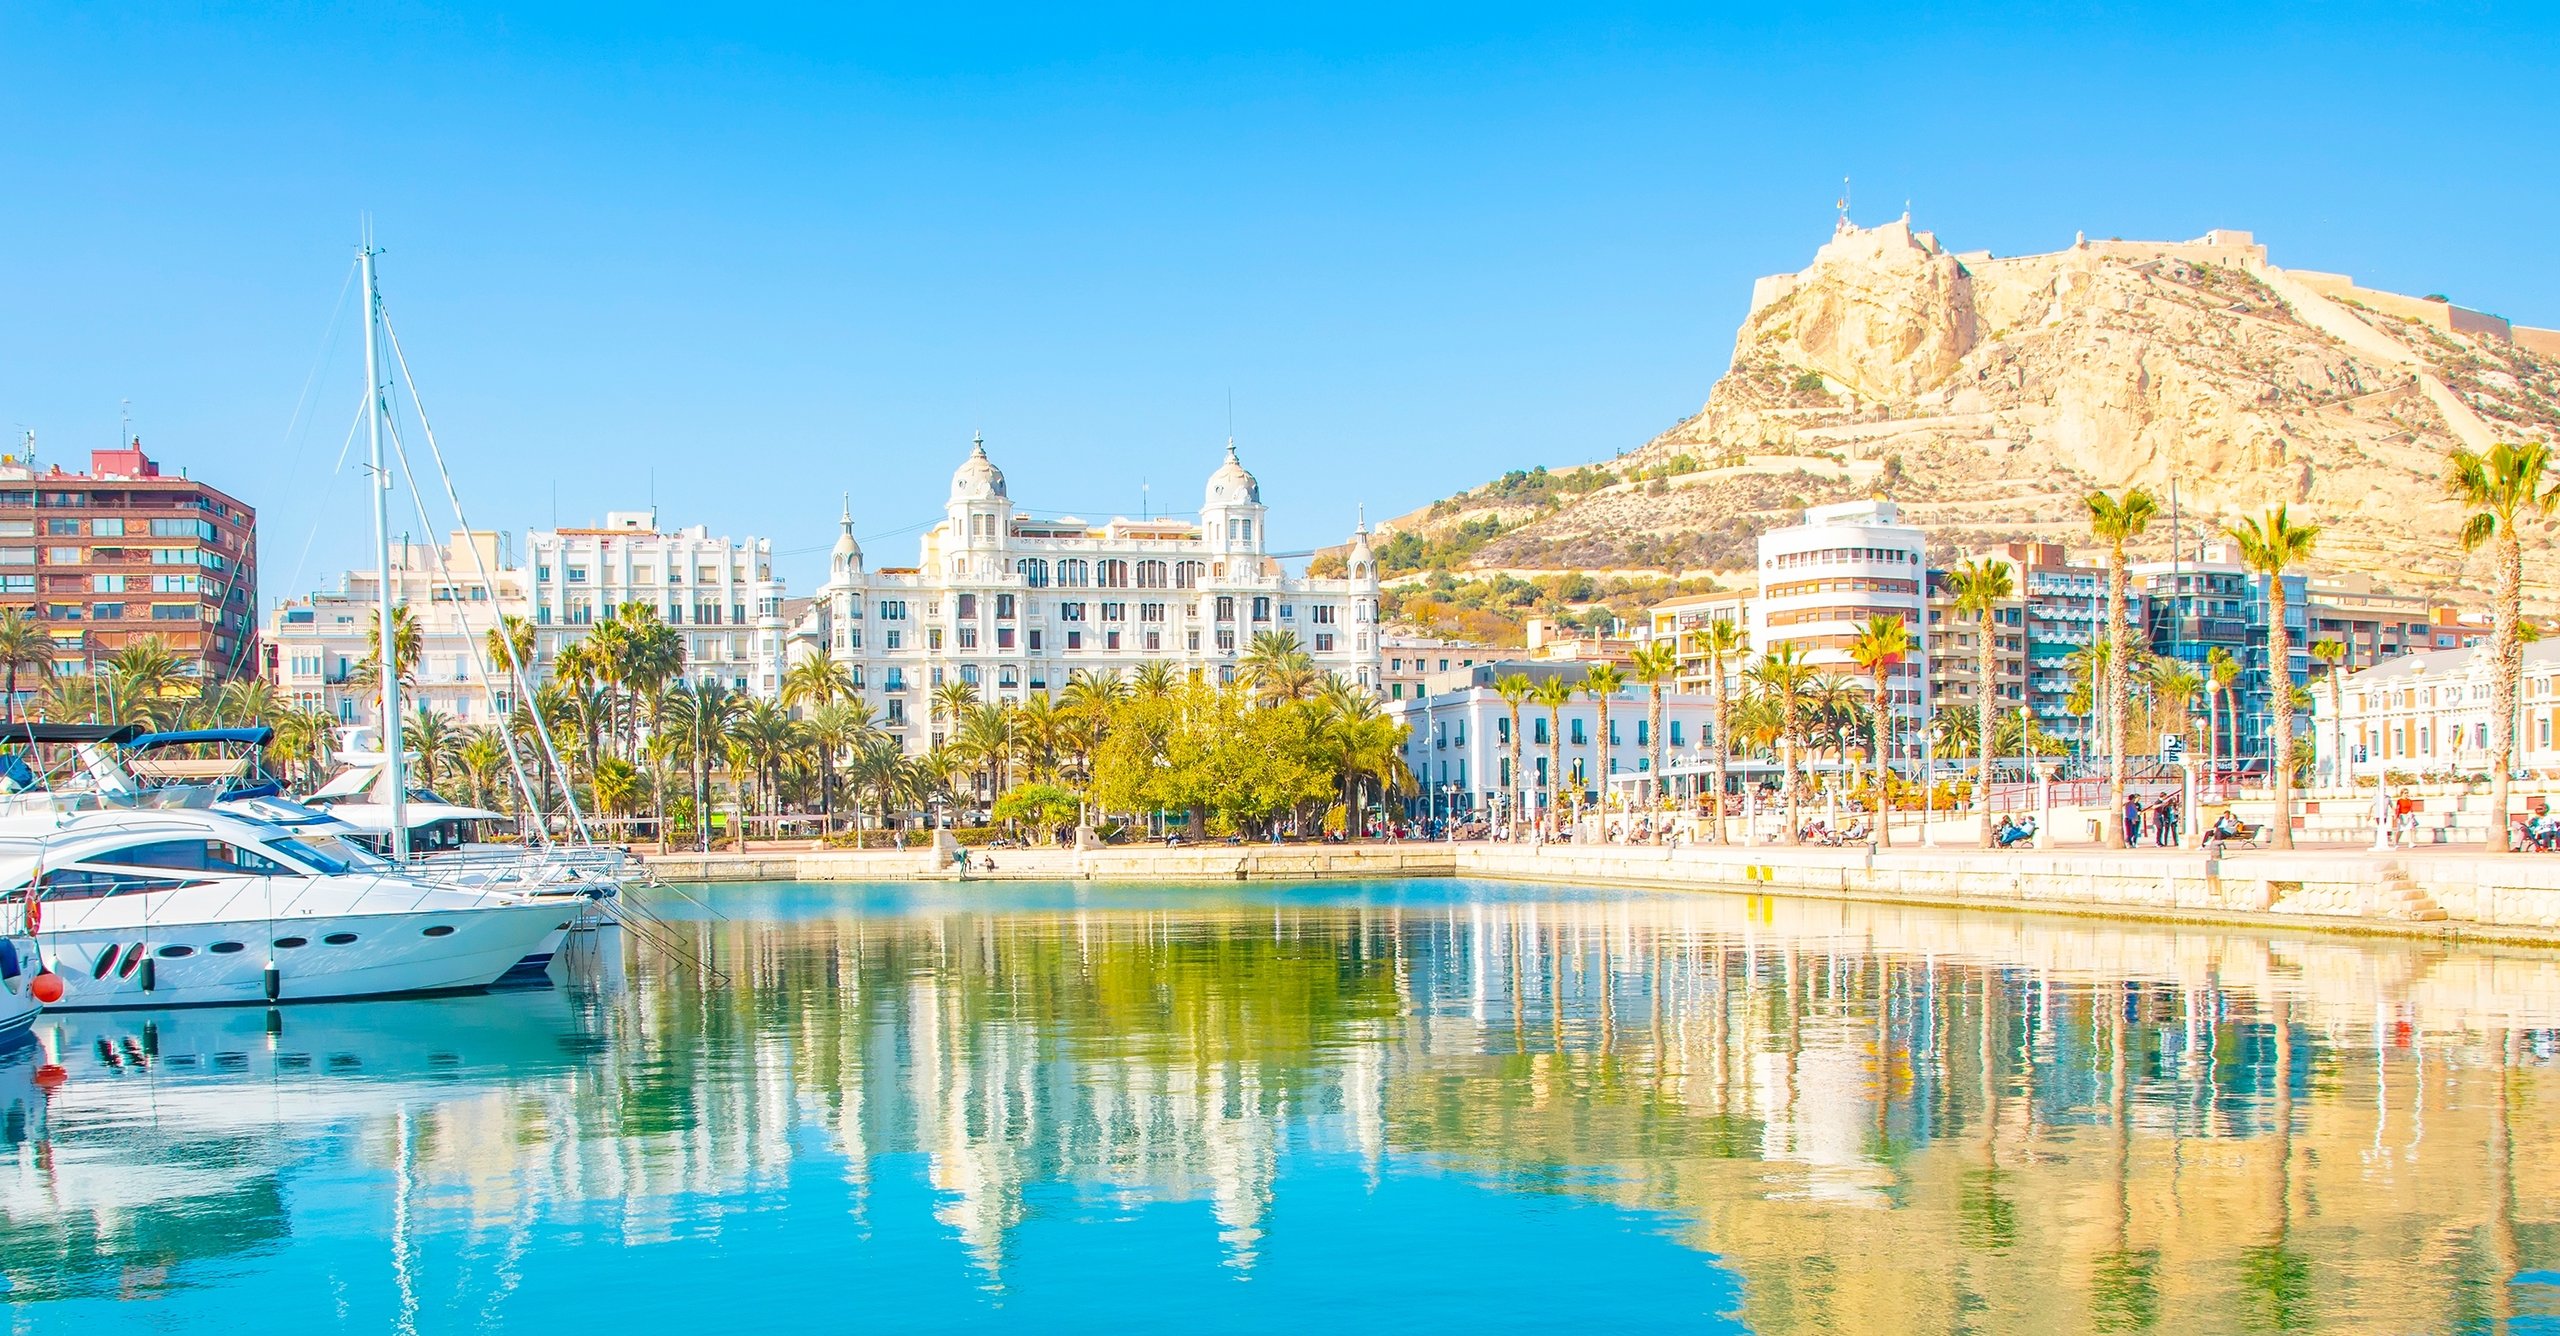 Panorama of Alicante old town, Costa Blanca sunny resort, Spain travel photo. Alicante city is the capital of the Alicante province.